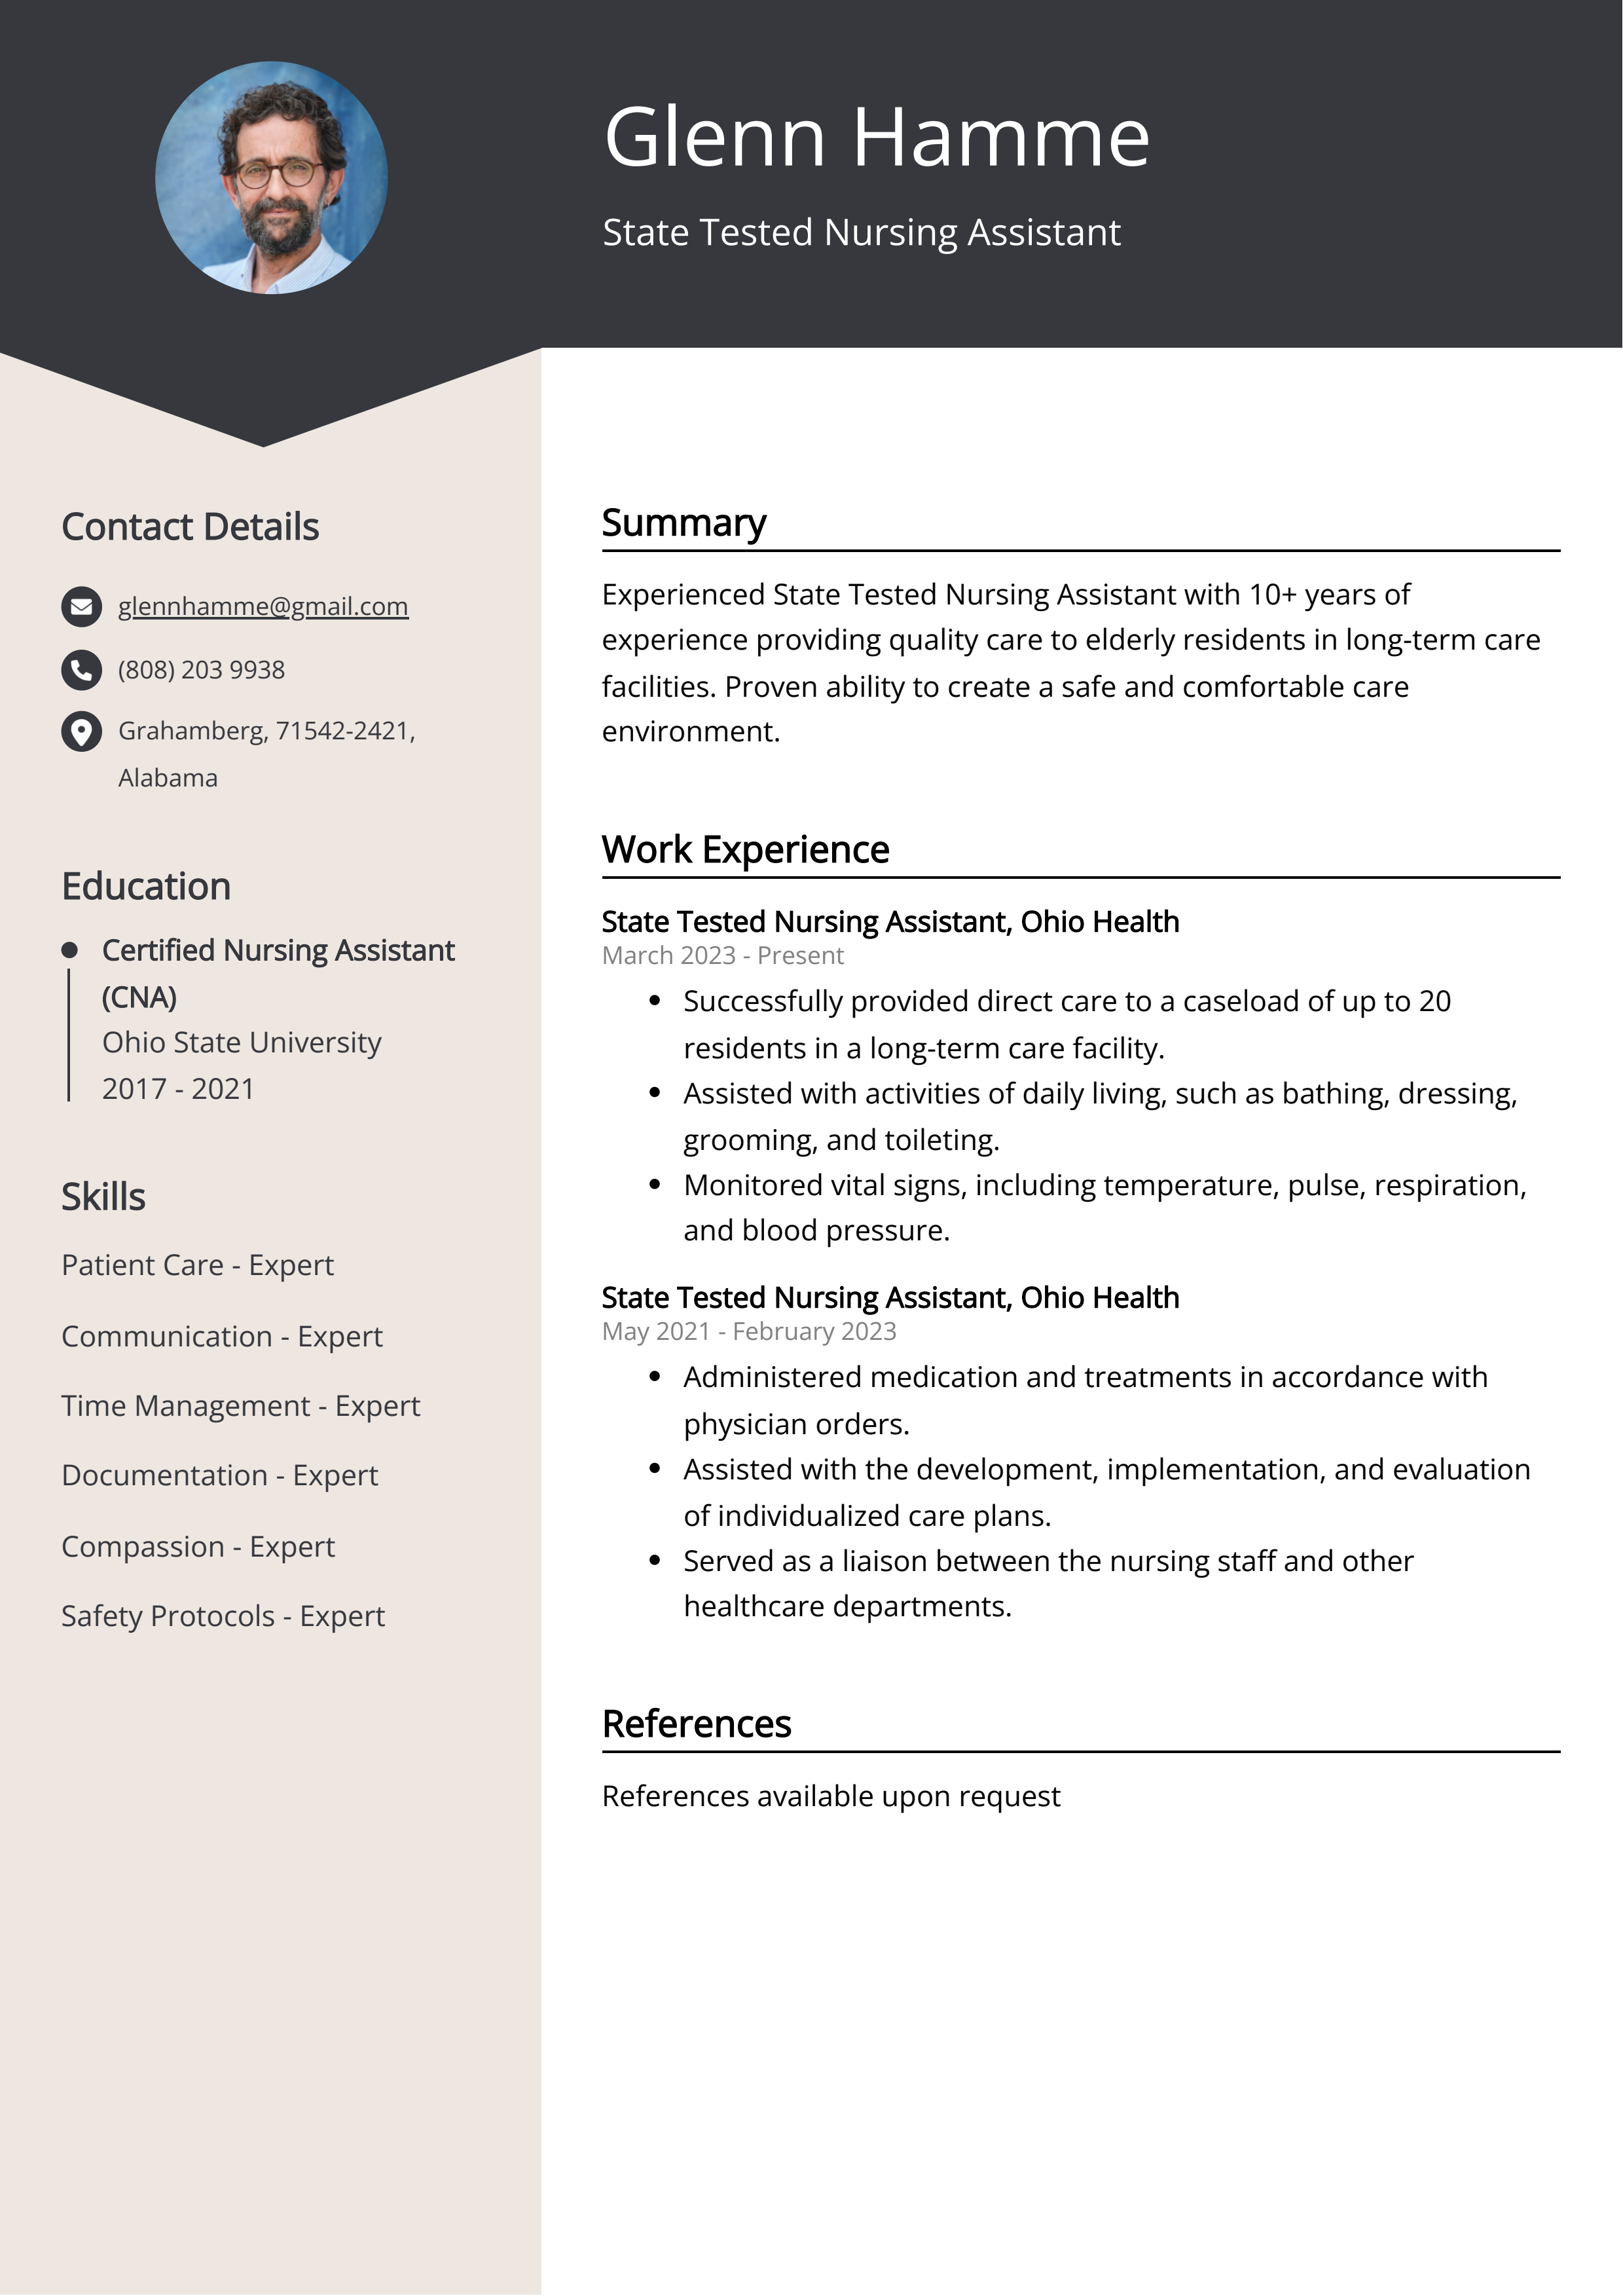 State Tested Nursing Assistant Resume Example